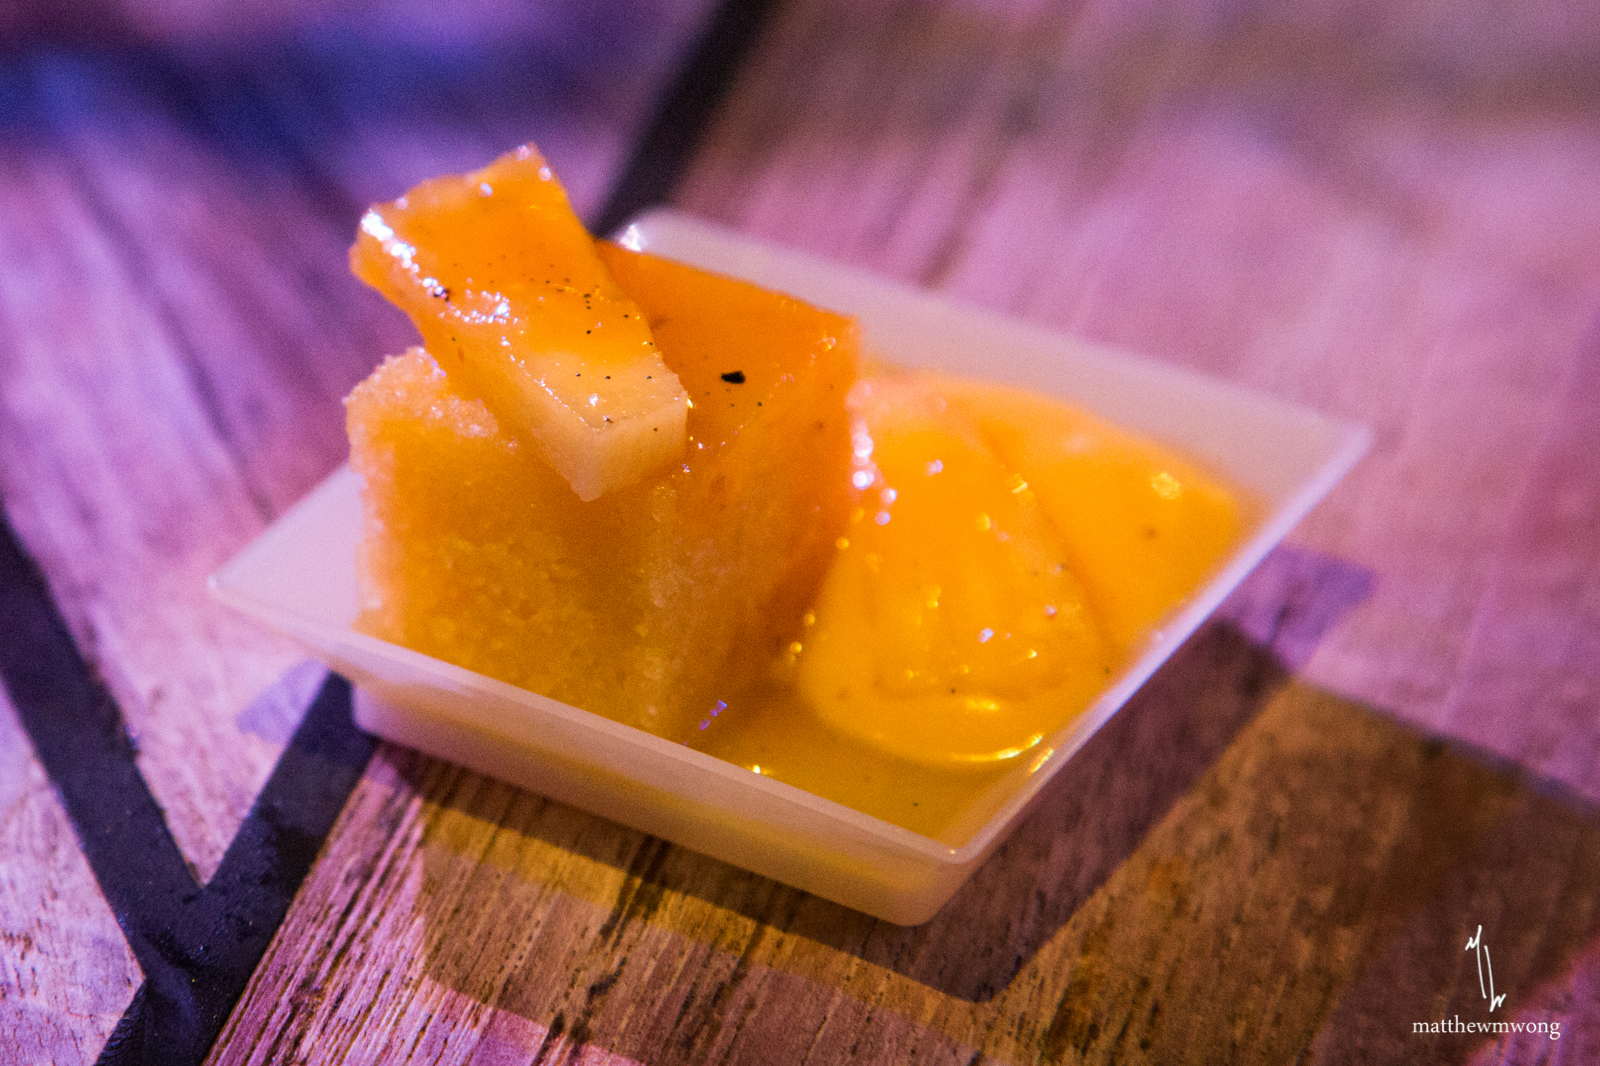 Pineapple Cake with vanilla, passion fruit, and micro cilantro by Chris Hanmer